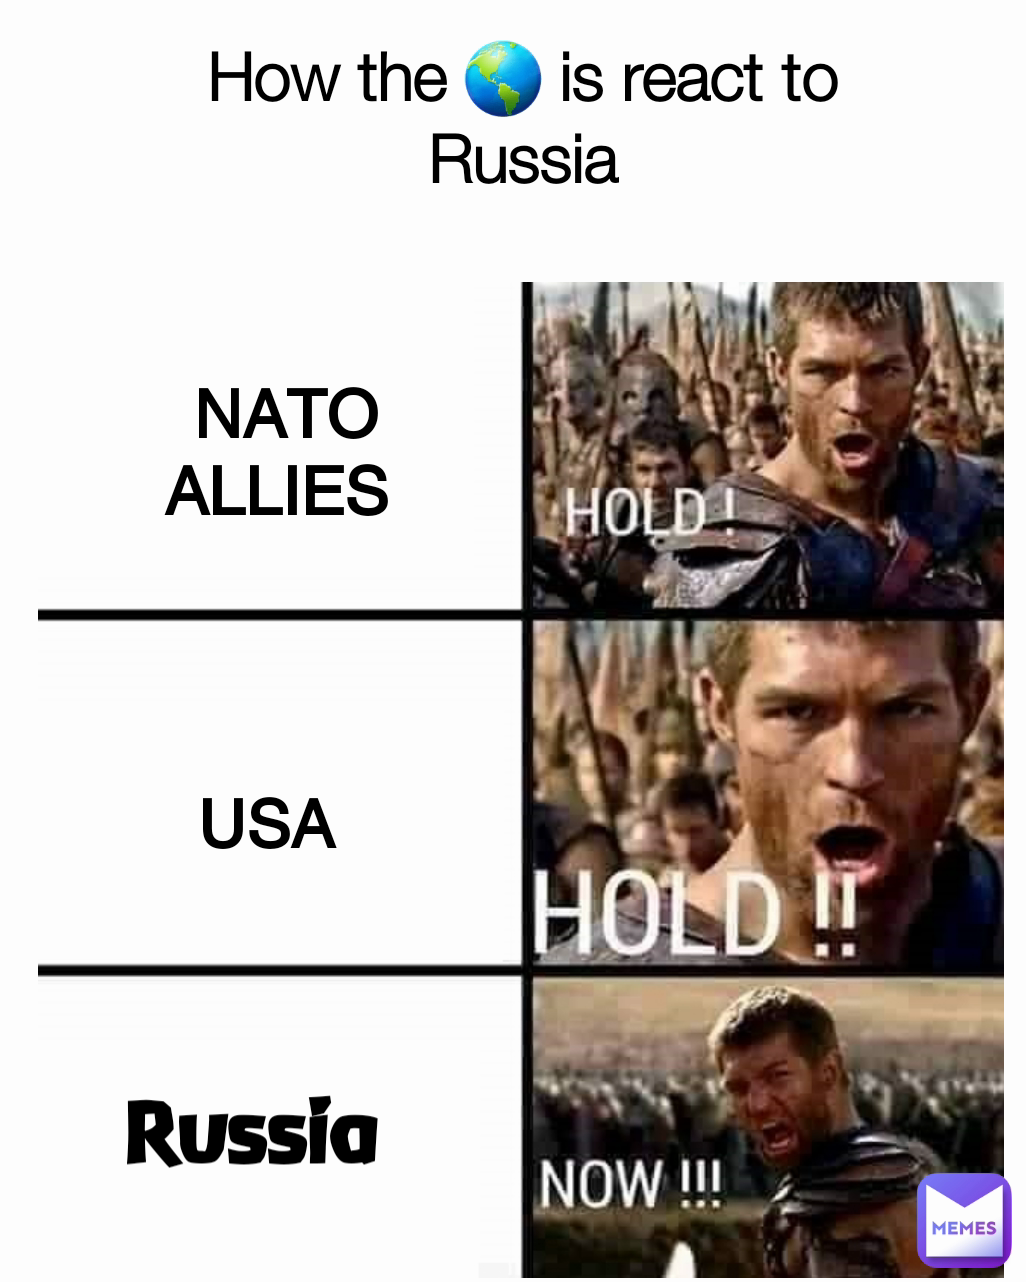 How the 🌎 is react to Russia
 Russia 
 NATO ALLIES  USA 